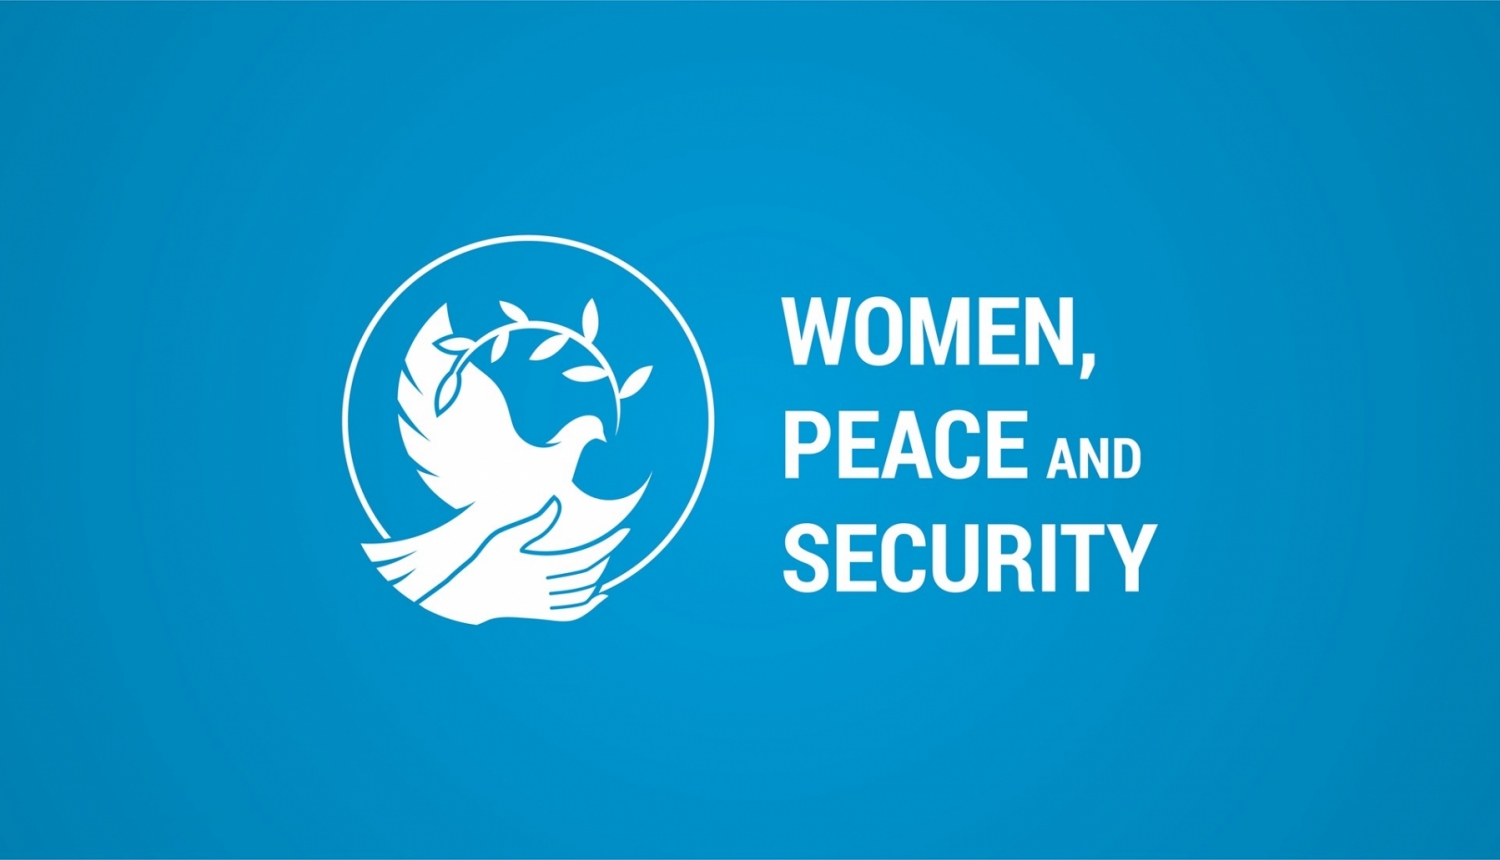 Women peace and security